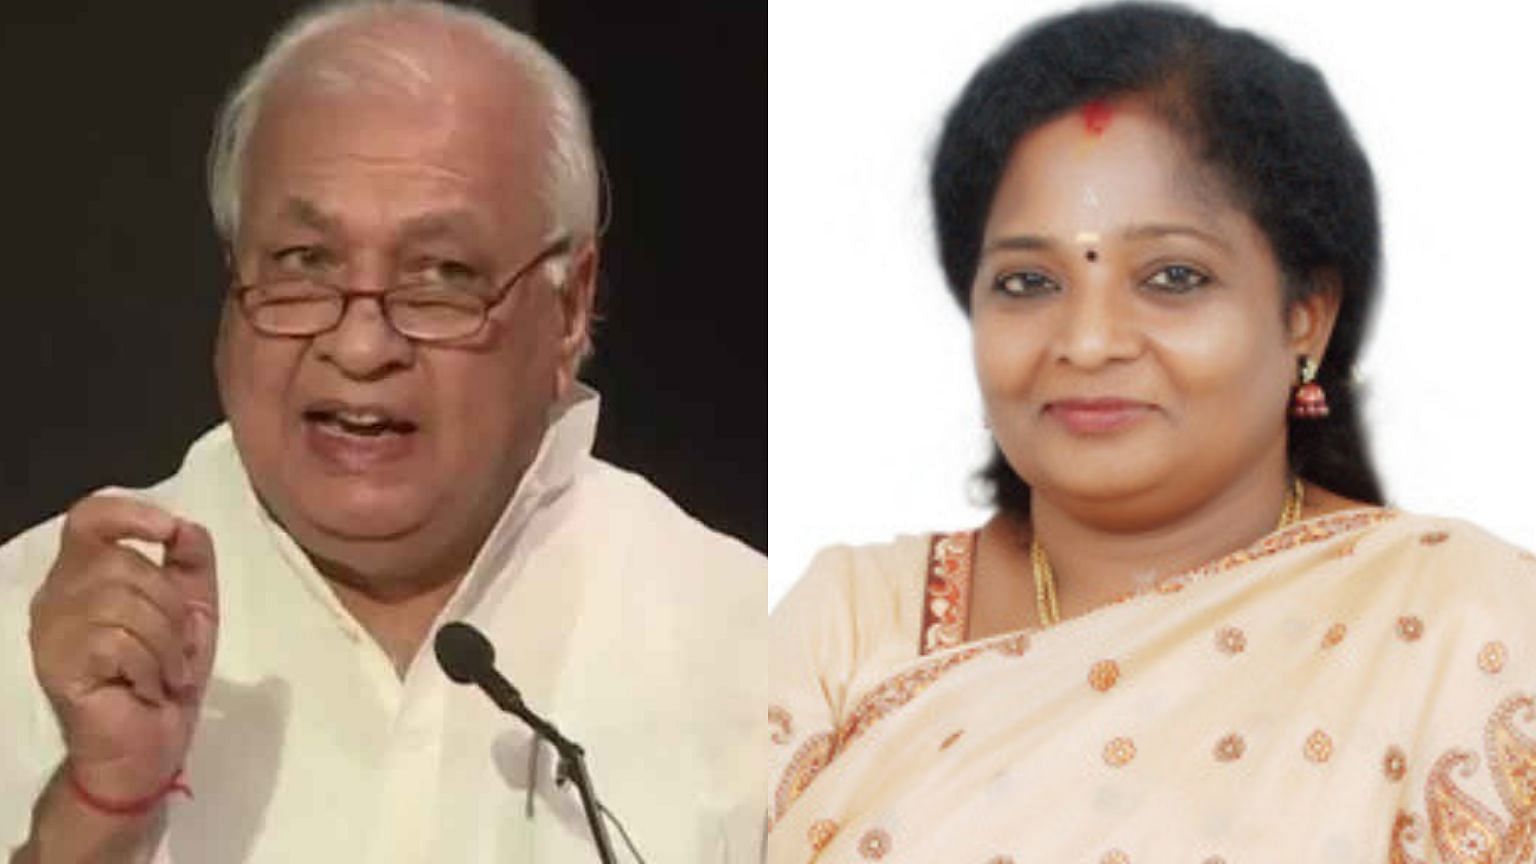 Former Union Minister Arif Mohammad Khan and BJP Tamil Nadu President Tamilisai Soundararajan are among five new governors of states appointed by President Ram Nath Kovind on Sunday, 1 September 2019.